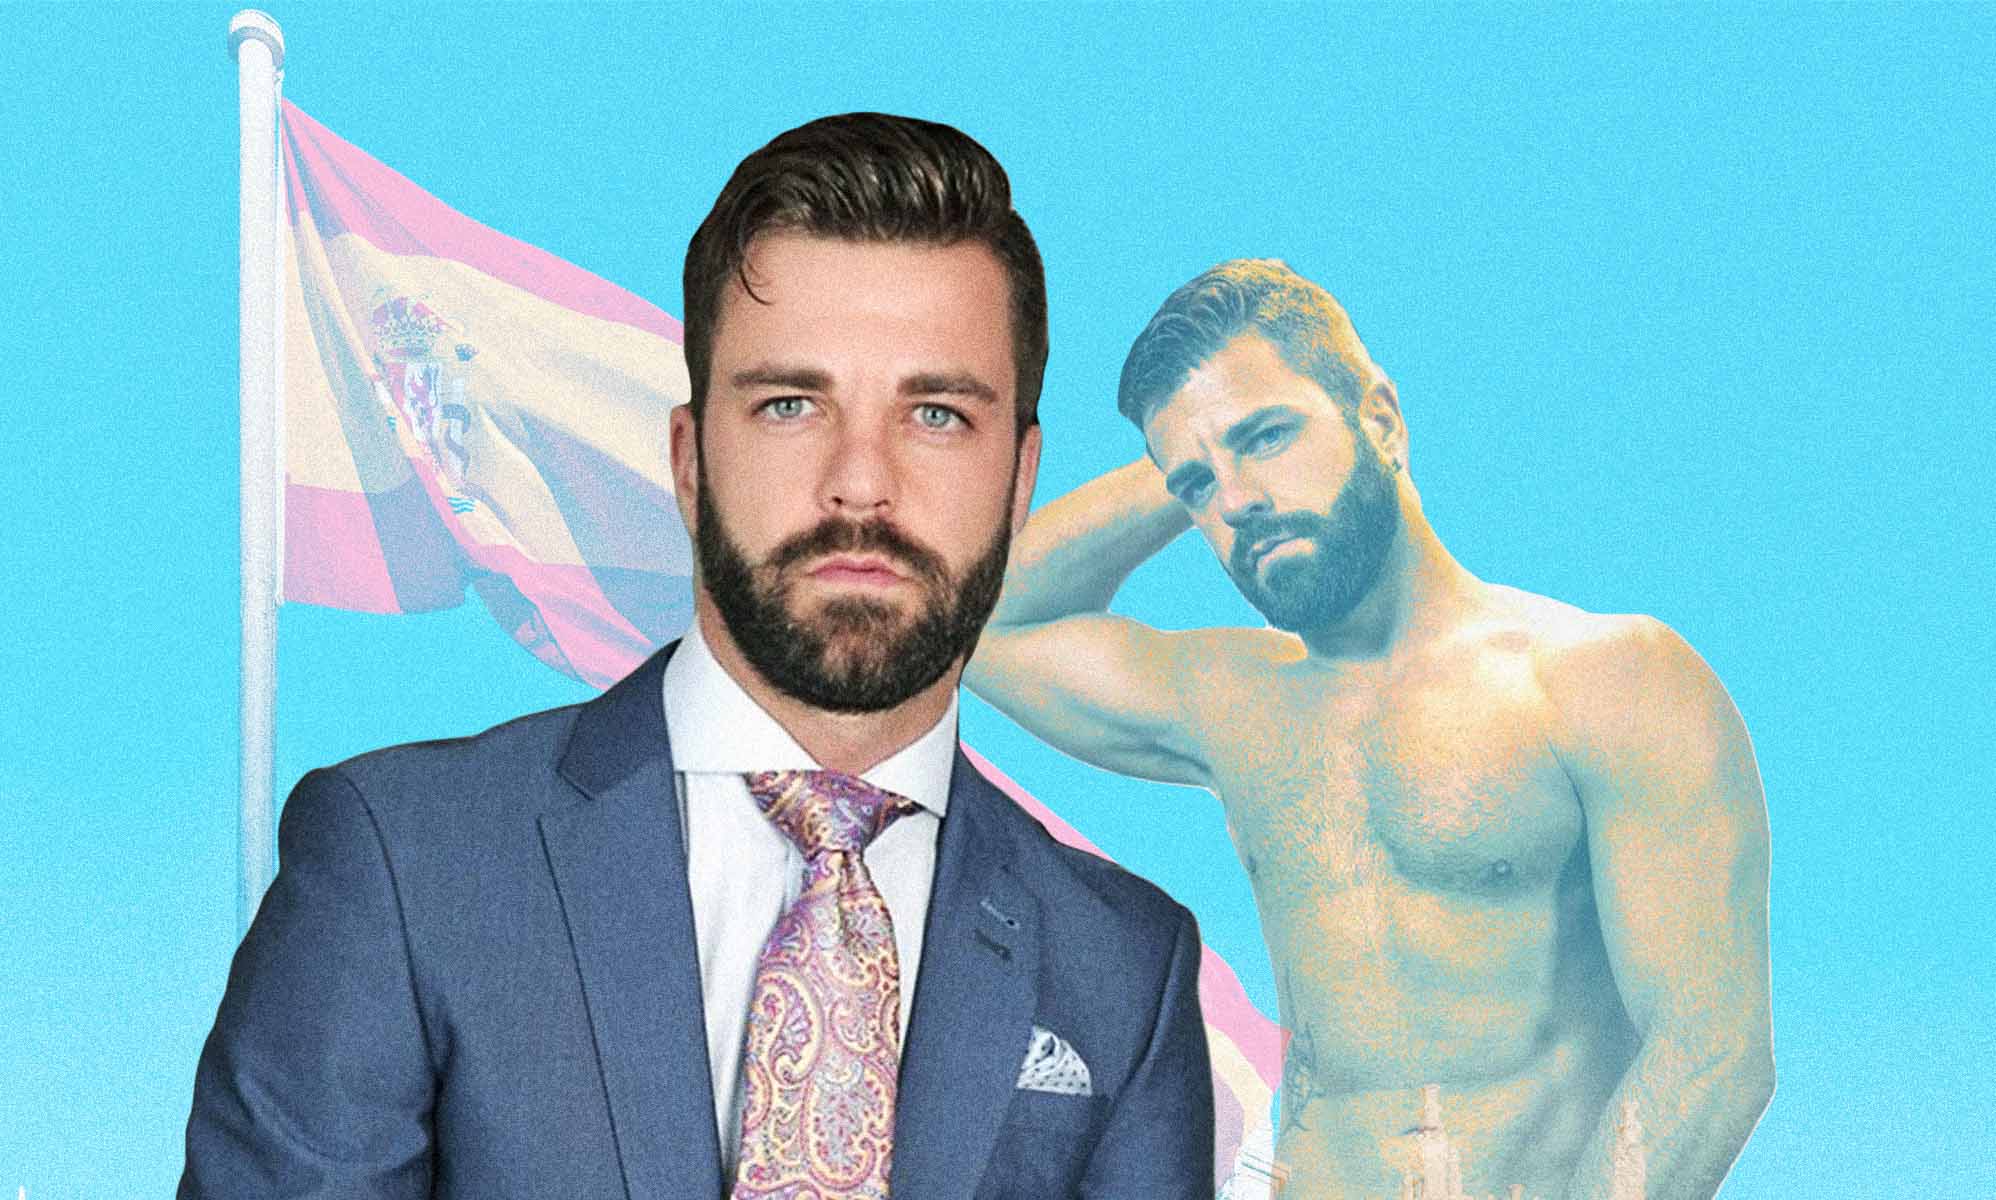 Forced Bisexual Party - Ex-gay porn star Antonio Moreno runs for mayor of Spanish town